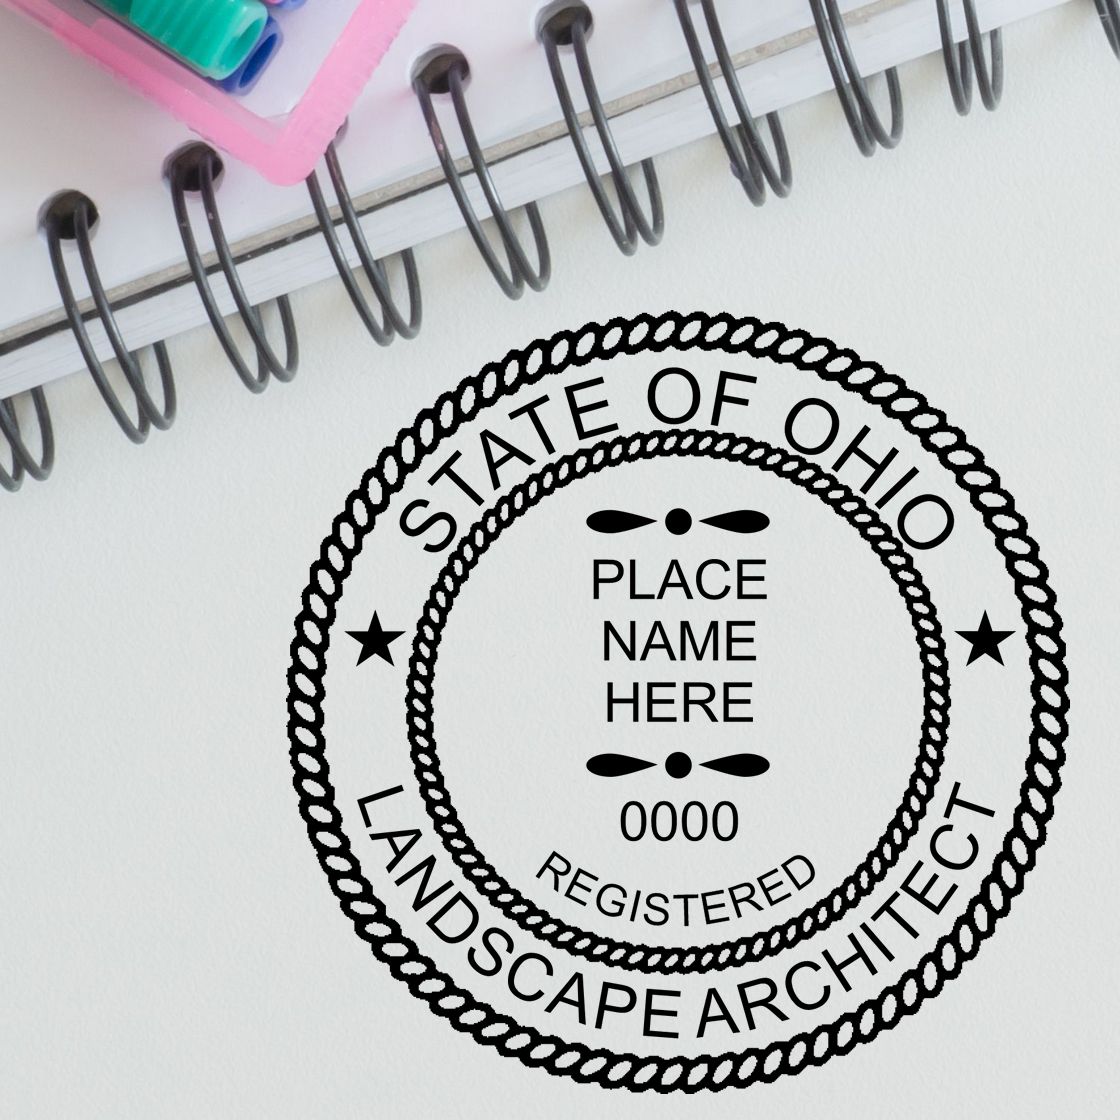 A lifestyle photo showing a stamped image of the Digital Ohio Landscape Architect Stamp on a piece of paper